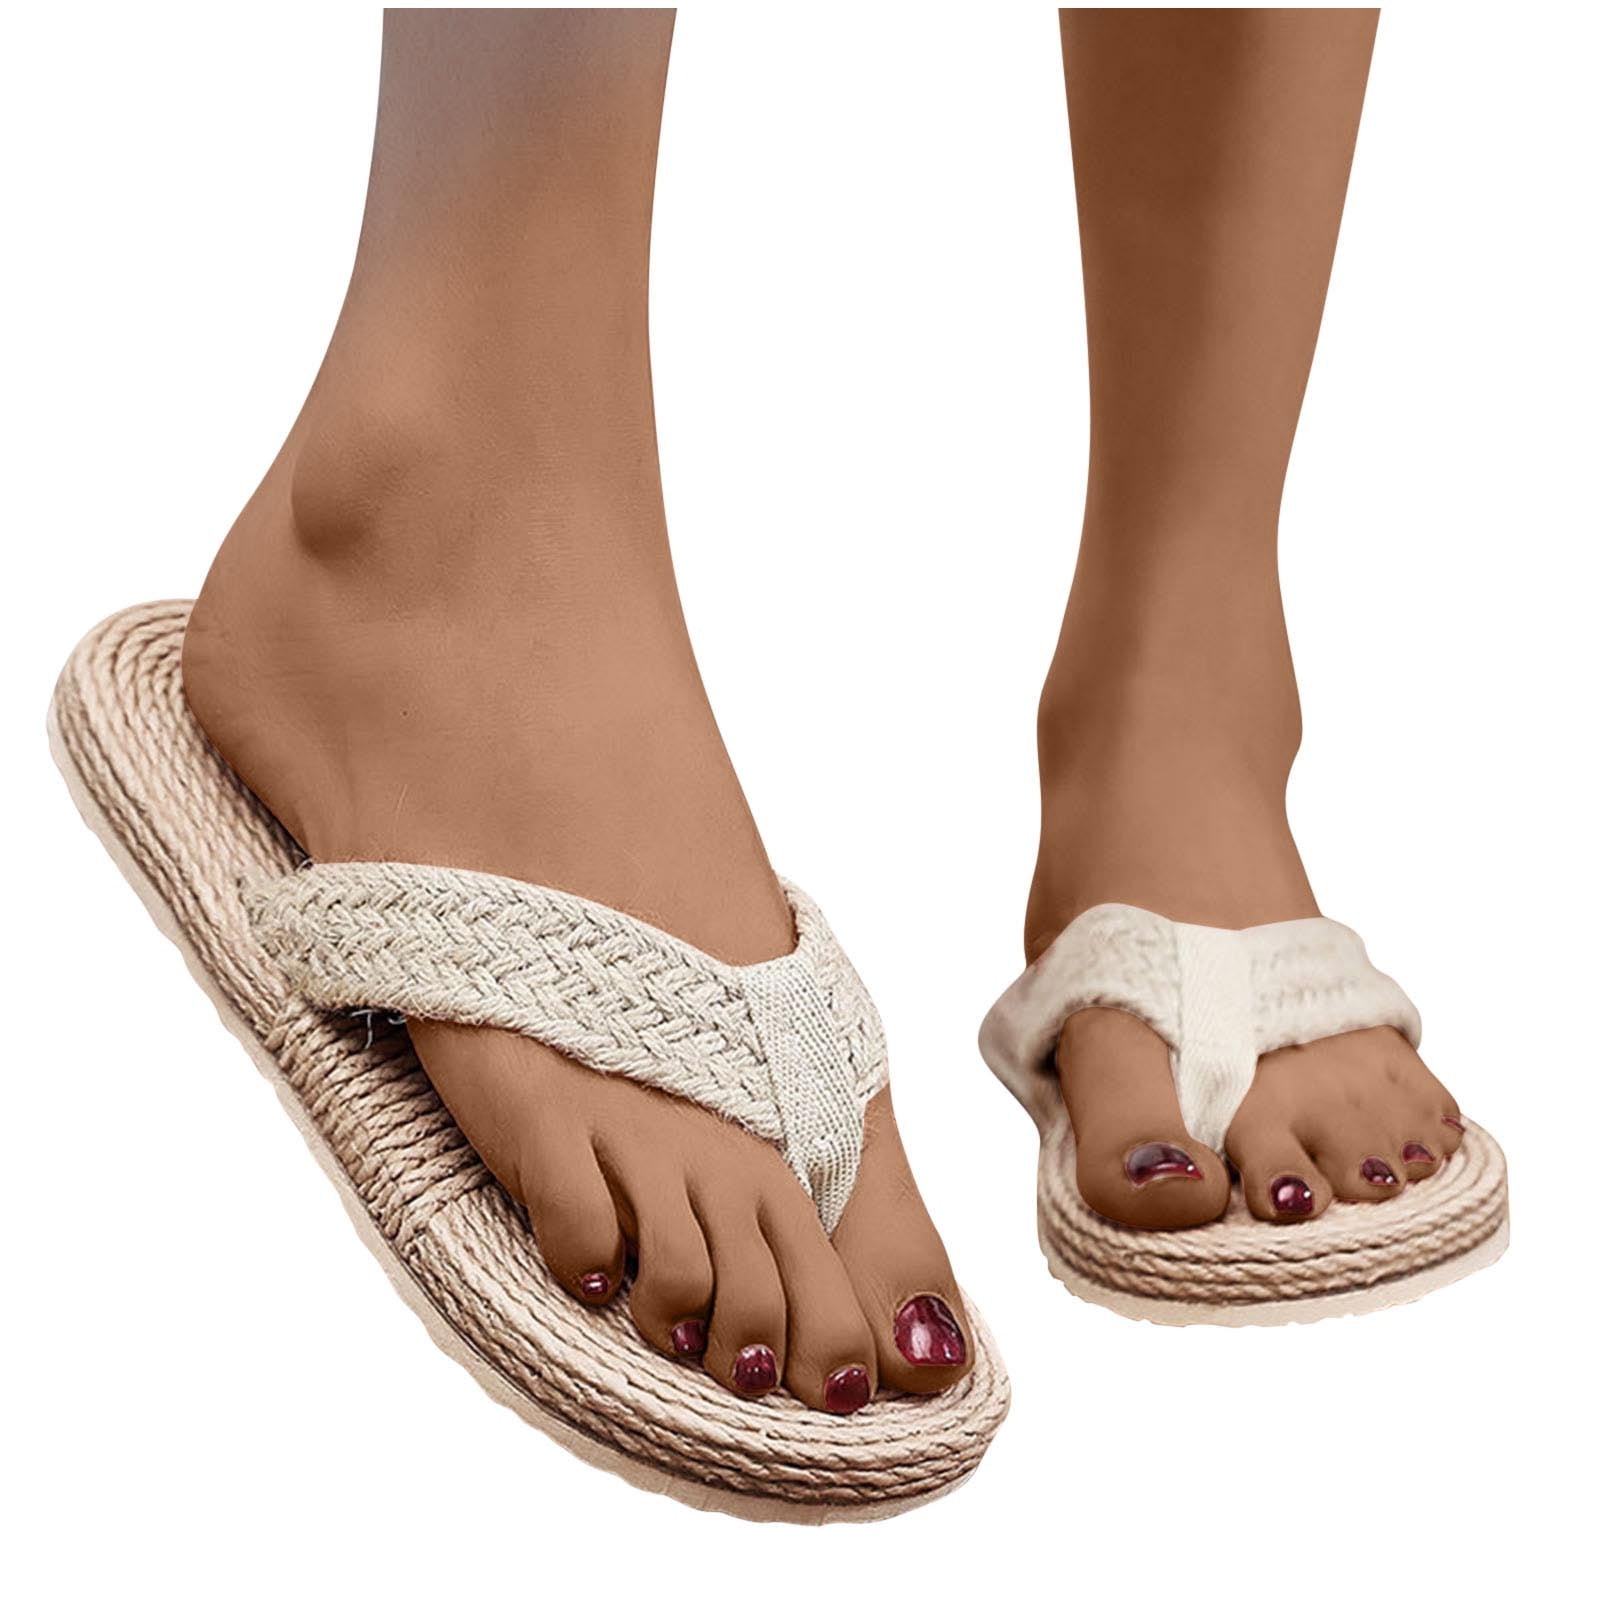 Details about   Summer Beach Swimming Pool Sandals Women Fashion Floral Indoor Non-Slip Slippers 